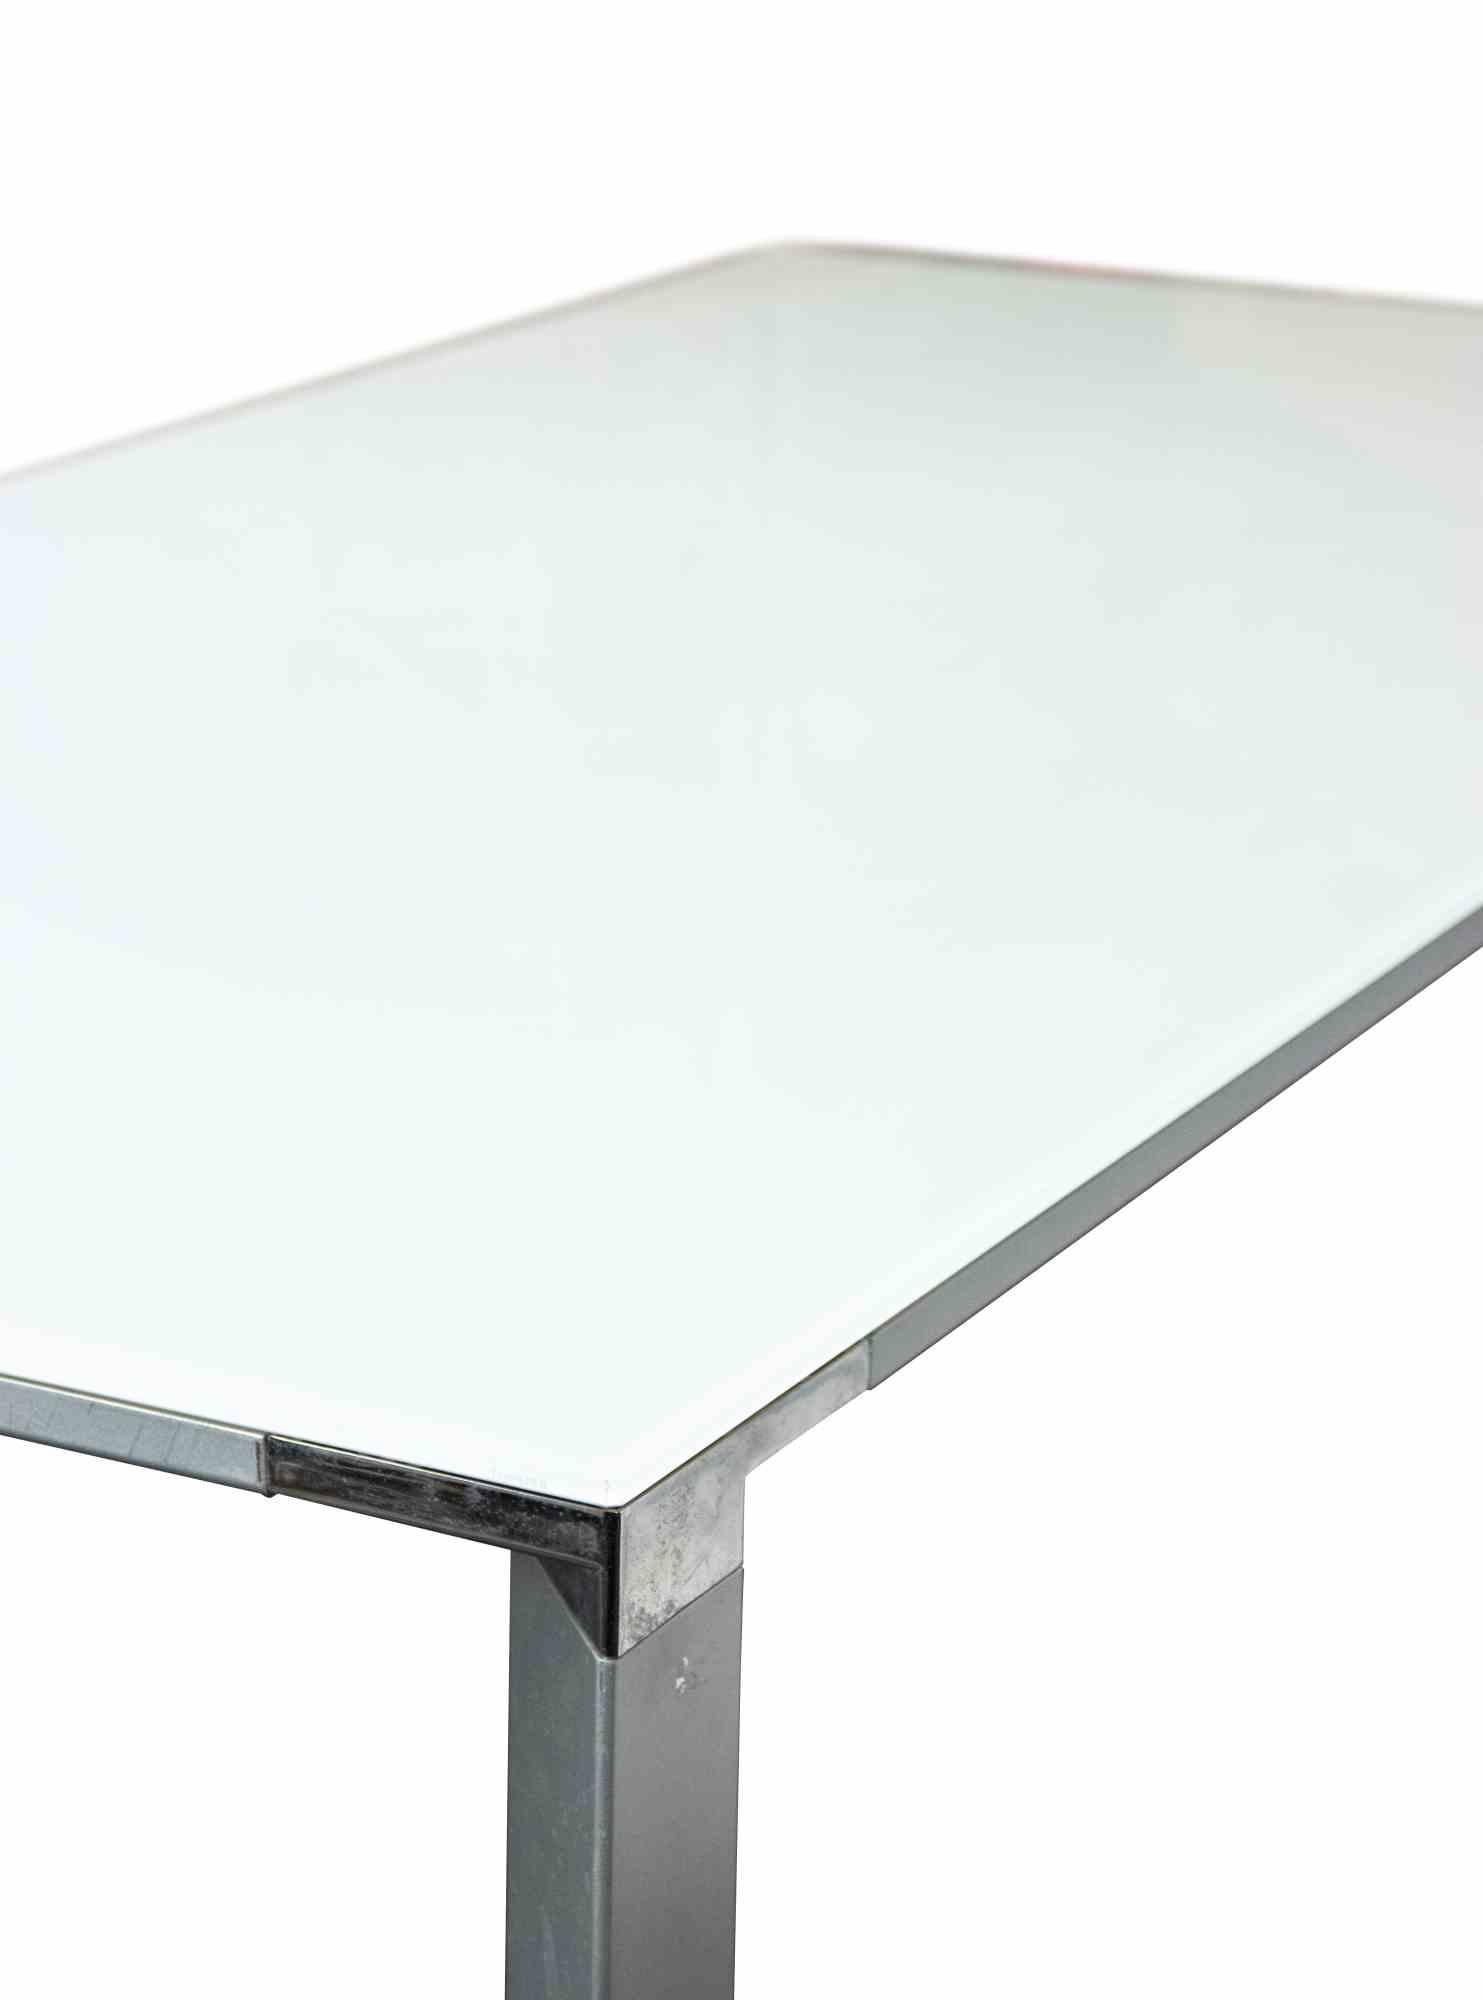 Miranda King Table is an original design item realized by the Italian designer furniture Calligaris.

A very elegant table realized in chromo glass.

Mint conditions.

Calligaris works are synonymous with beauty, high quality, minimalist but